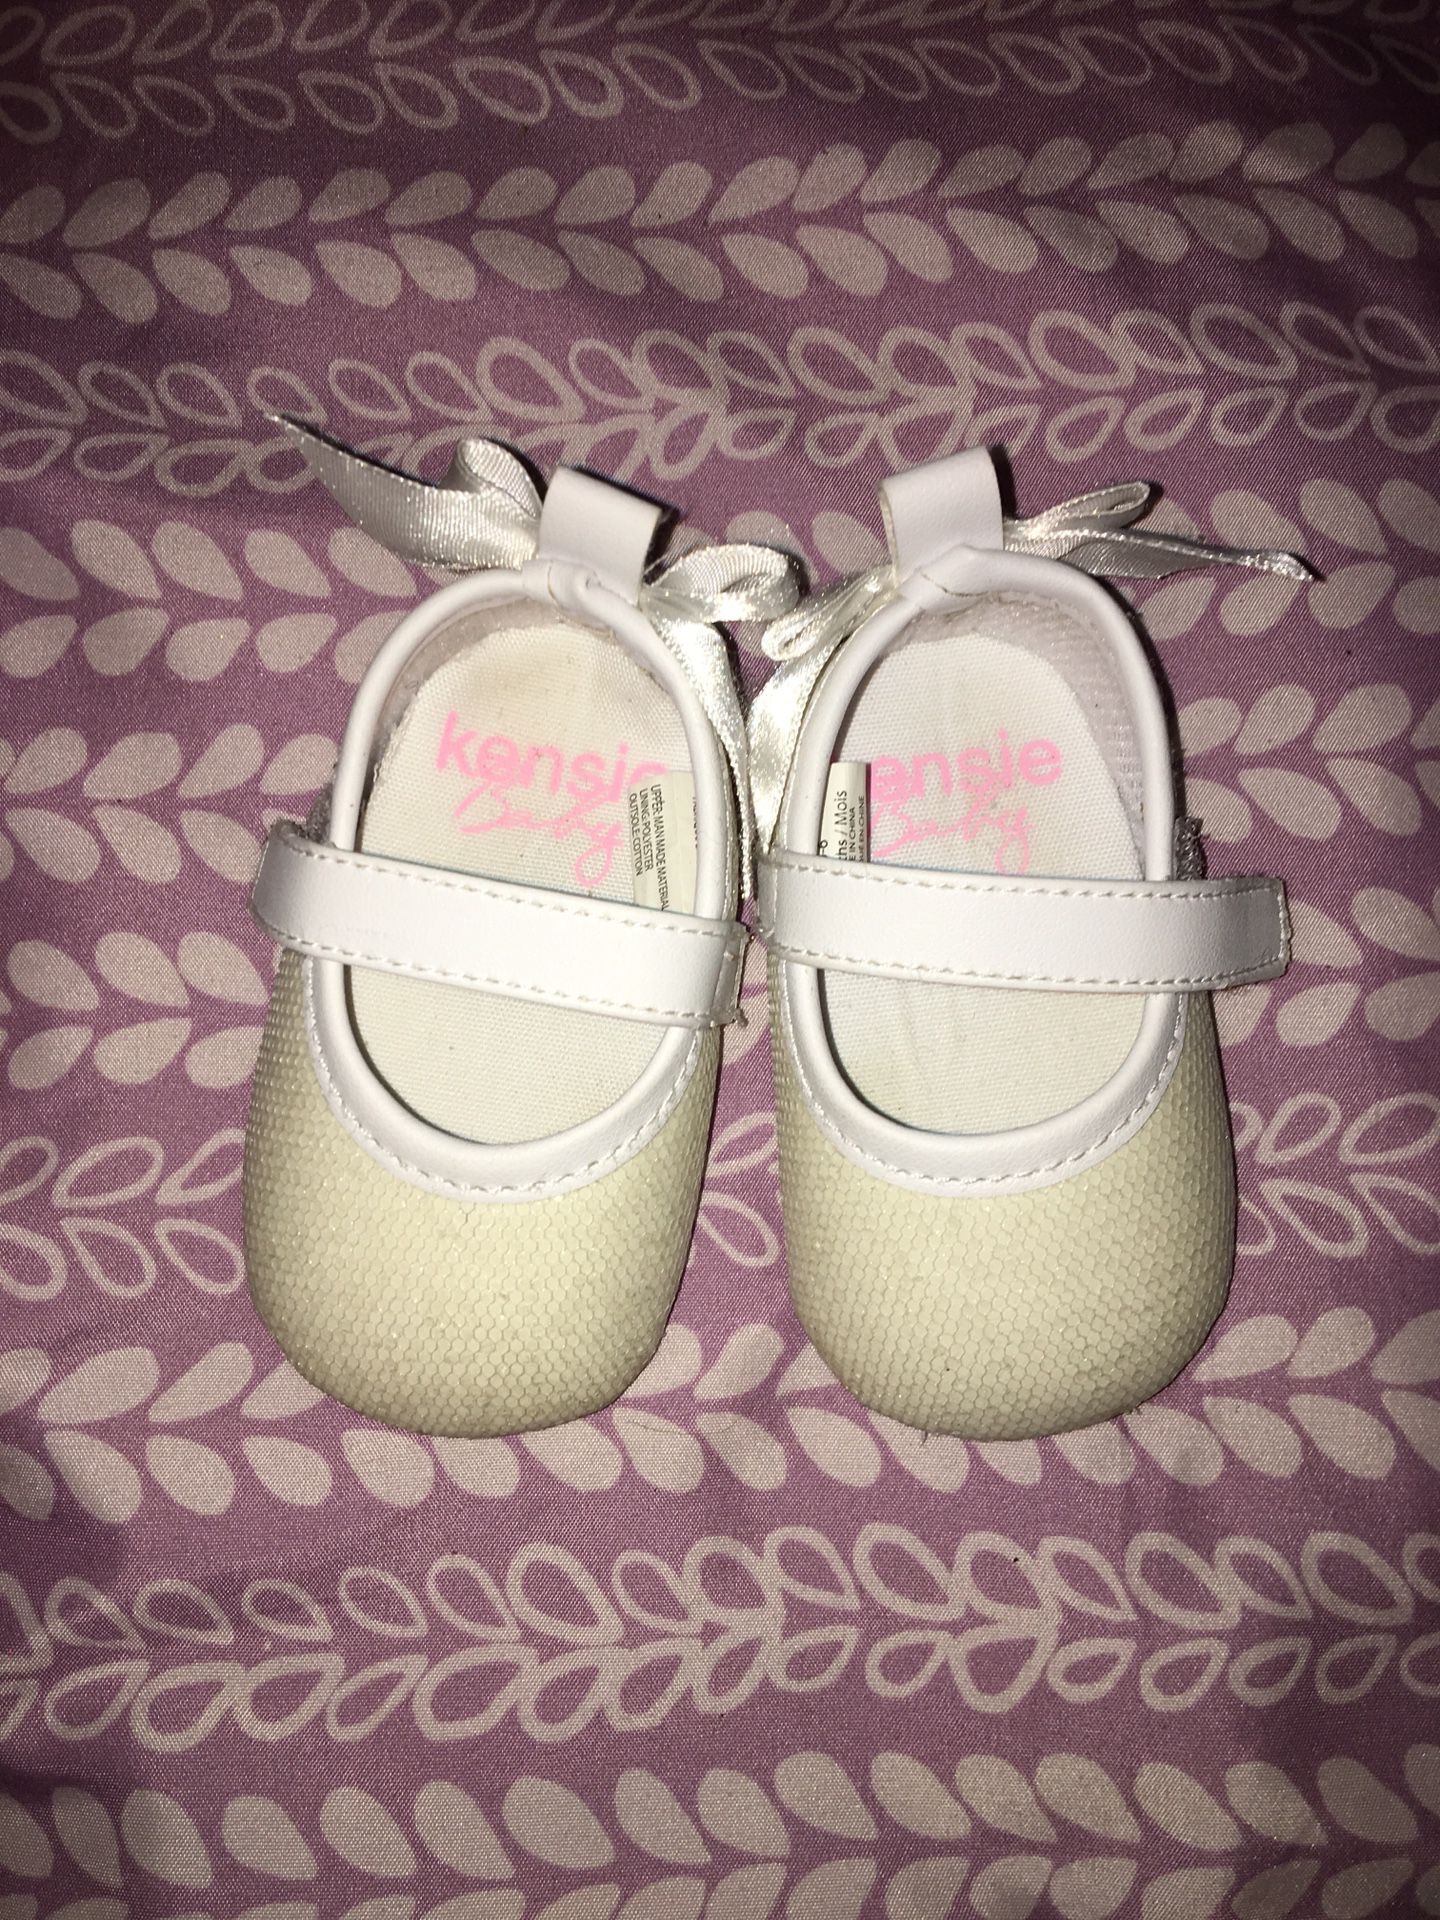 White baby shoes